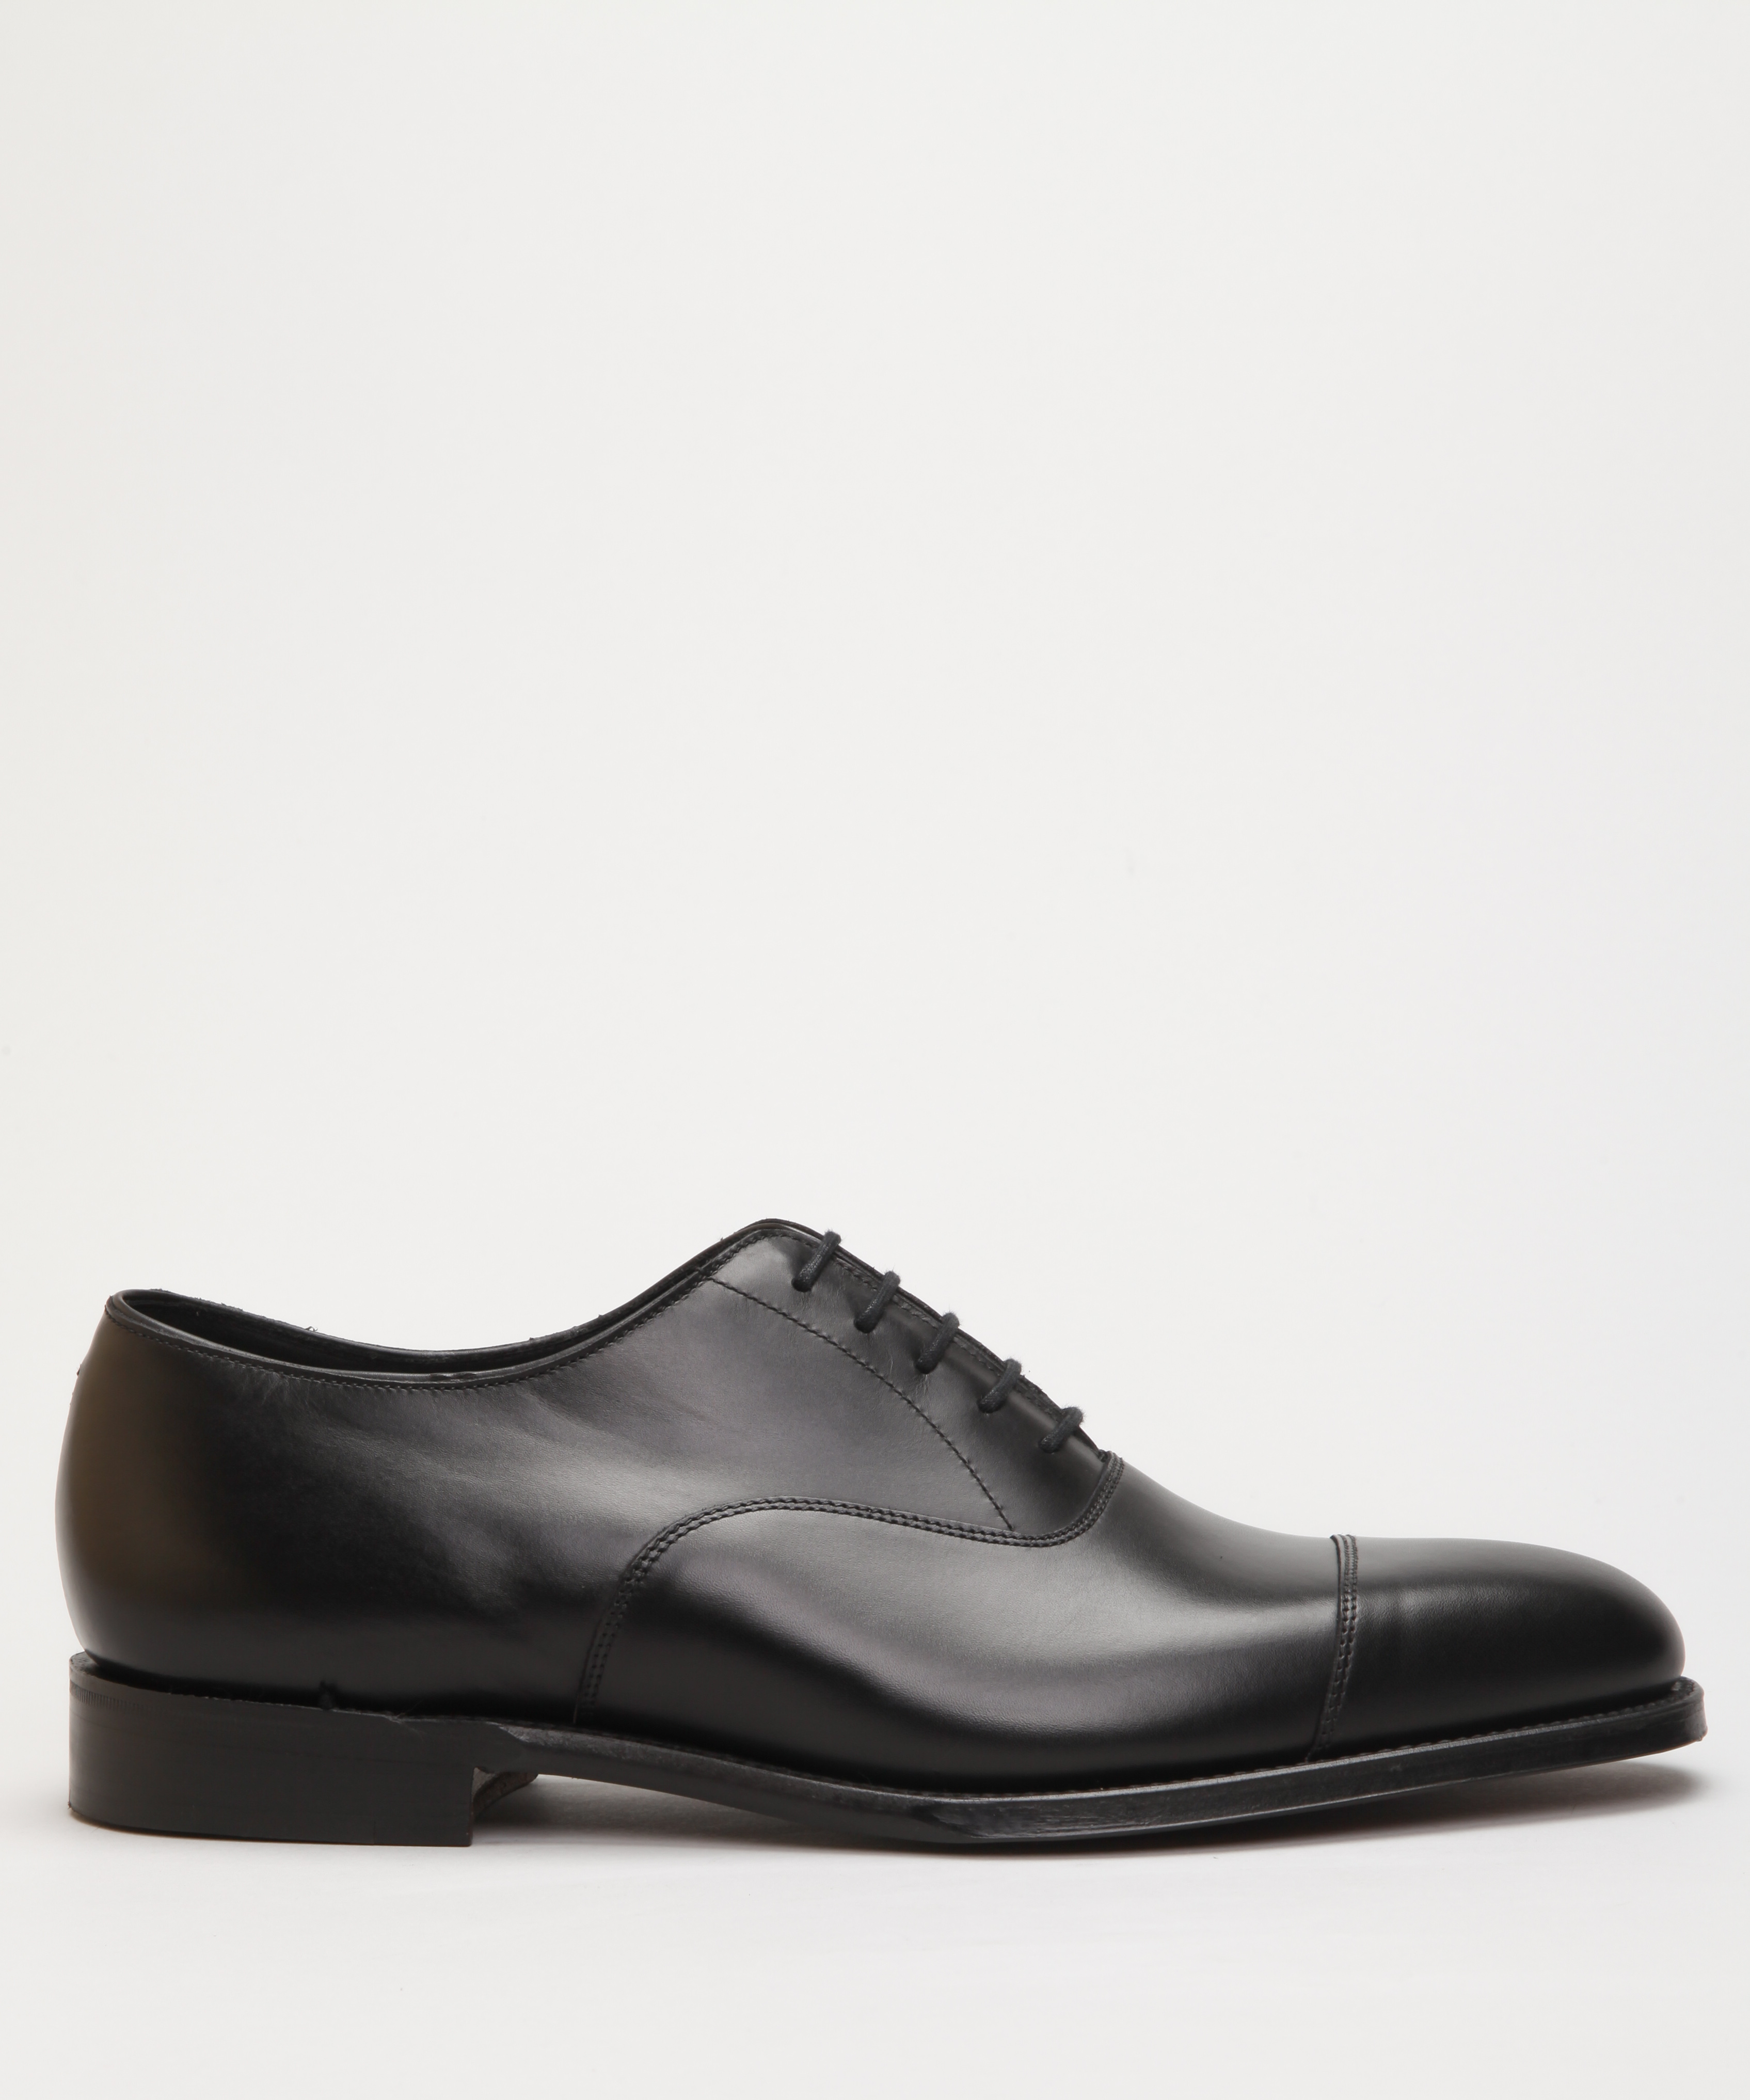 Loake Aldwych Black Shoes - Shoes Online - Lester Store